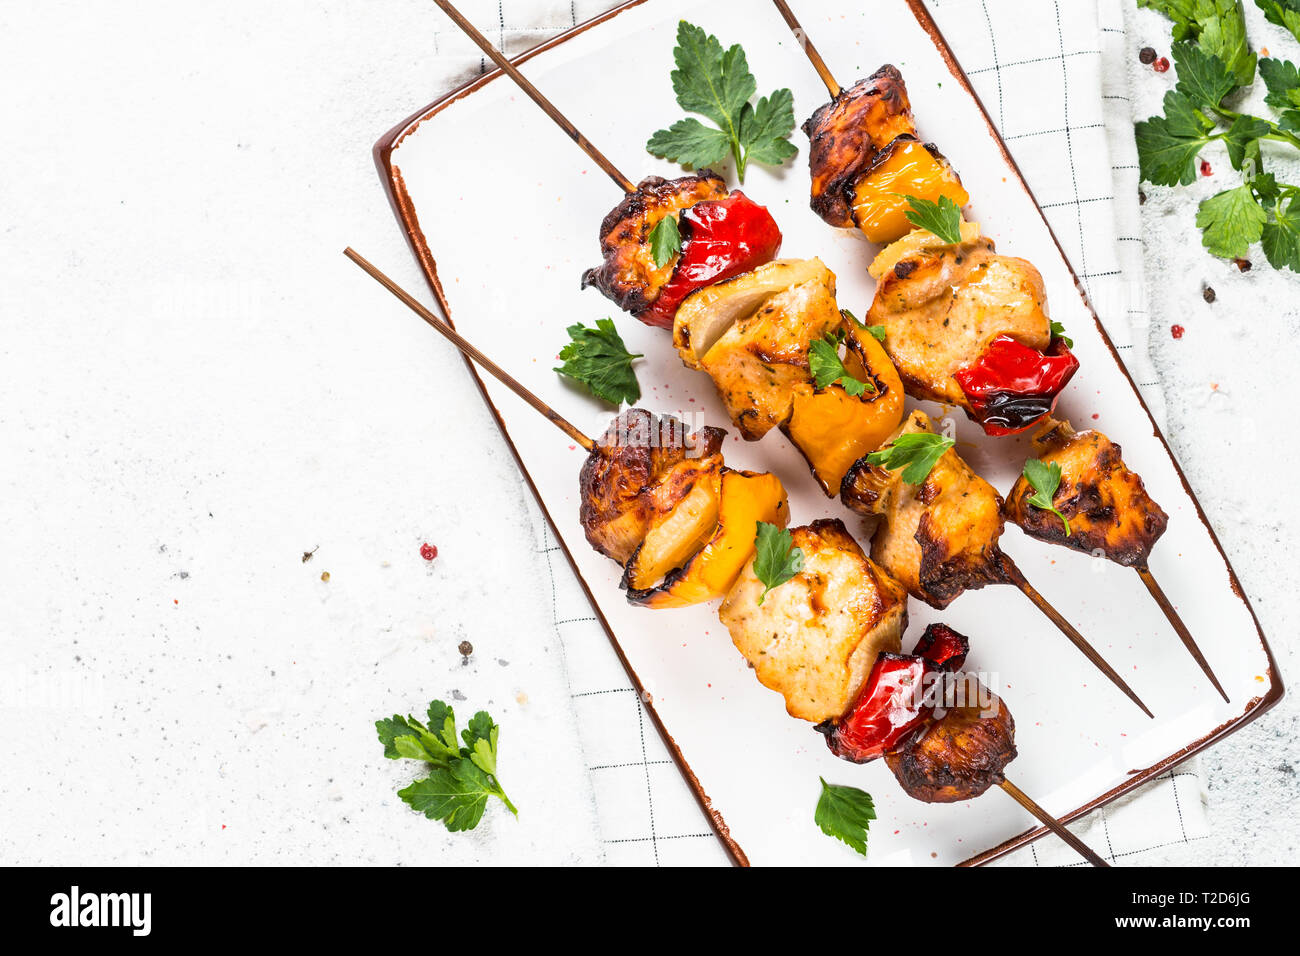 Chicken kebab or shashlik with vegetables on skewers on white stone table. Top view with copy space. Stock Photo